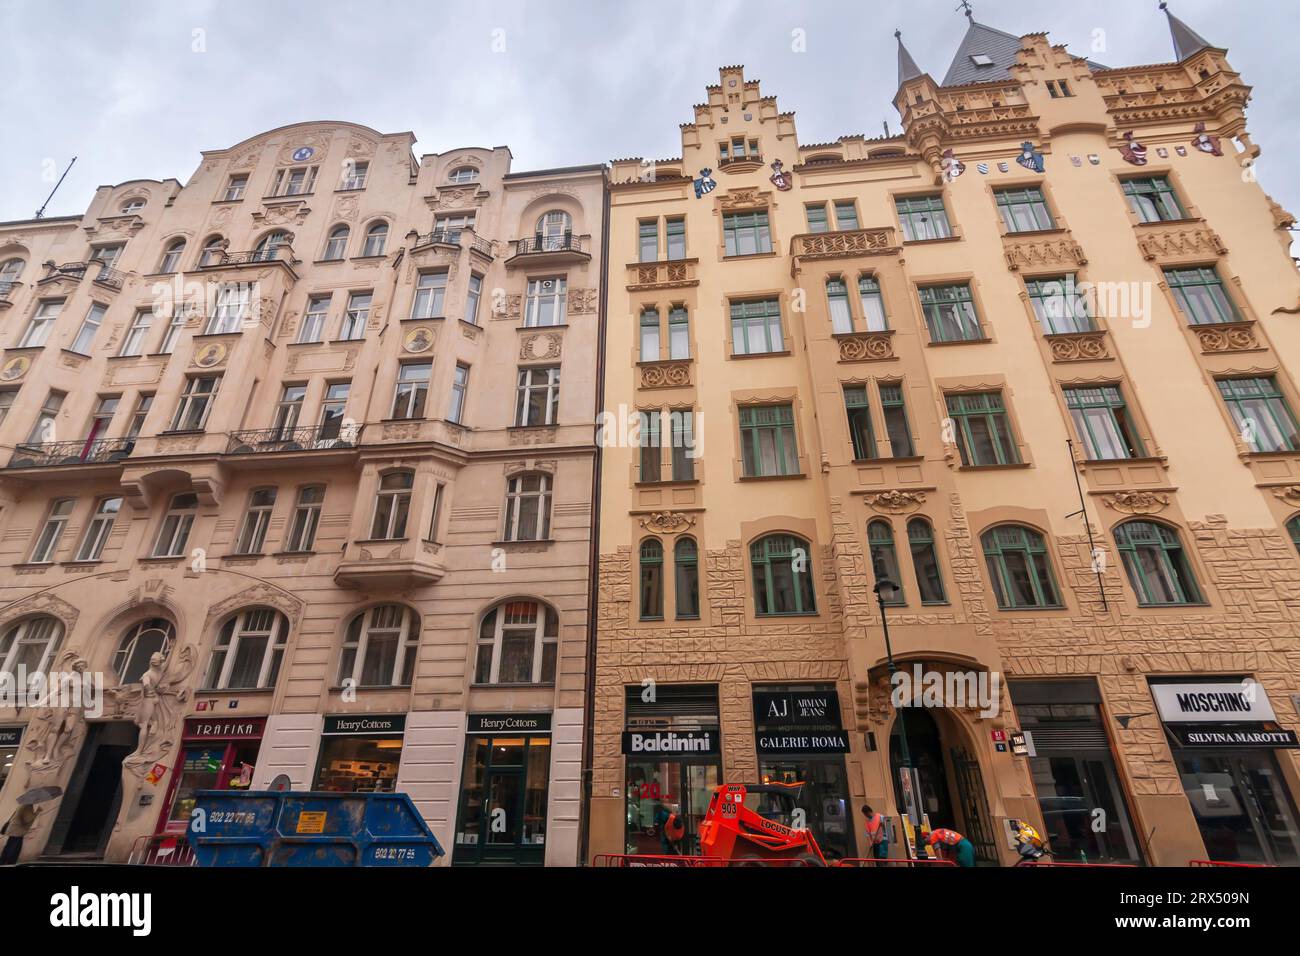 Prague, Czech Republic - August 17, 2010: The apartment building Široká 9 (left) in the art nouveau style and the House at St. George's (right) Stock Photo